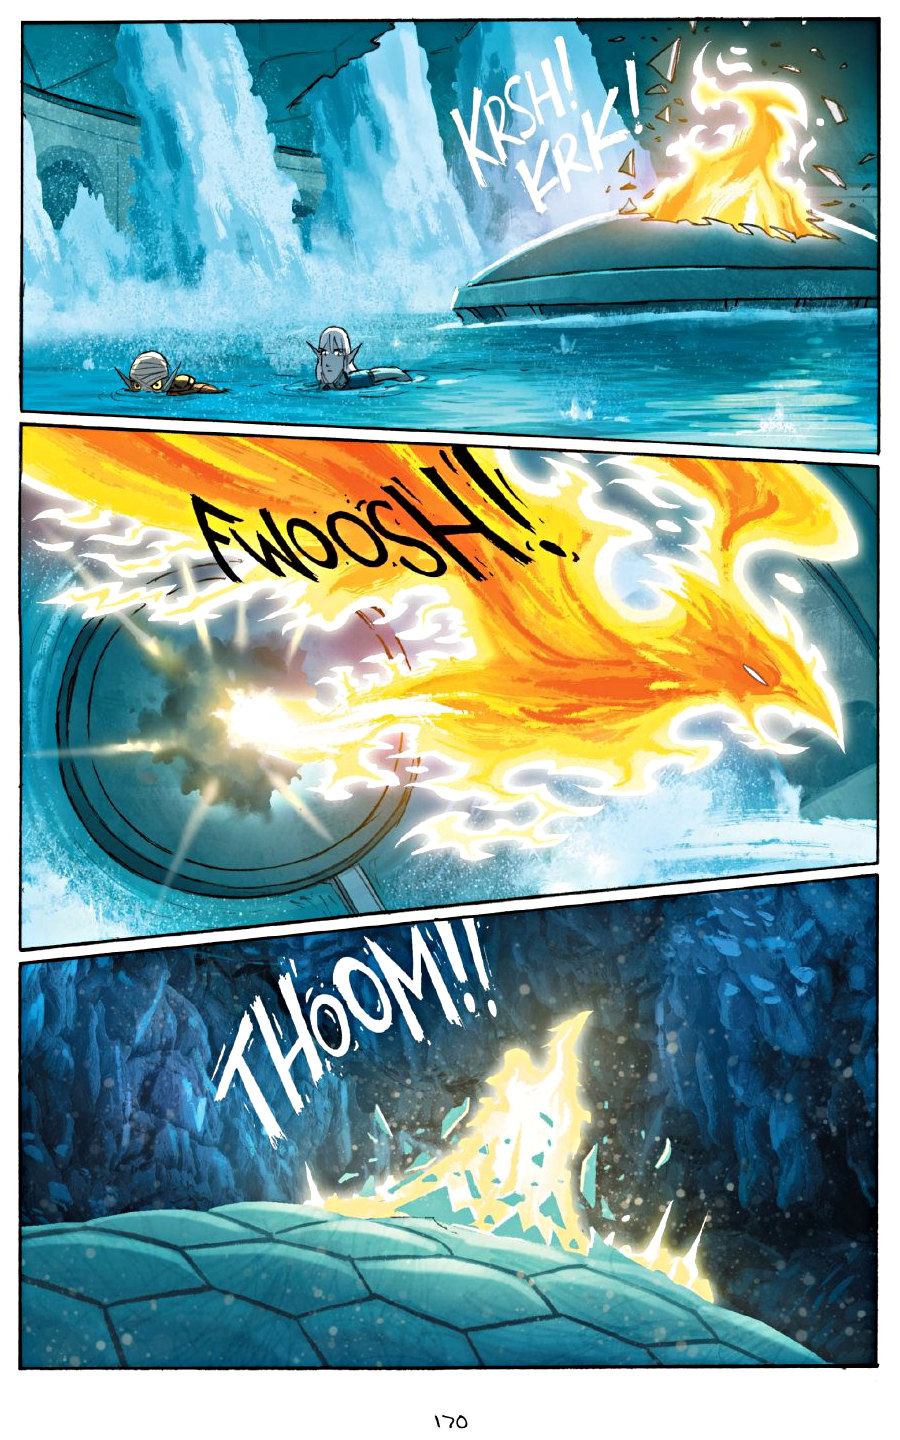 page 170 of amulet 7 firelight graphic novel